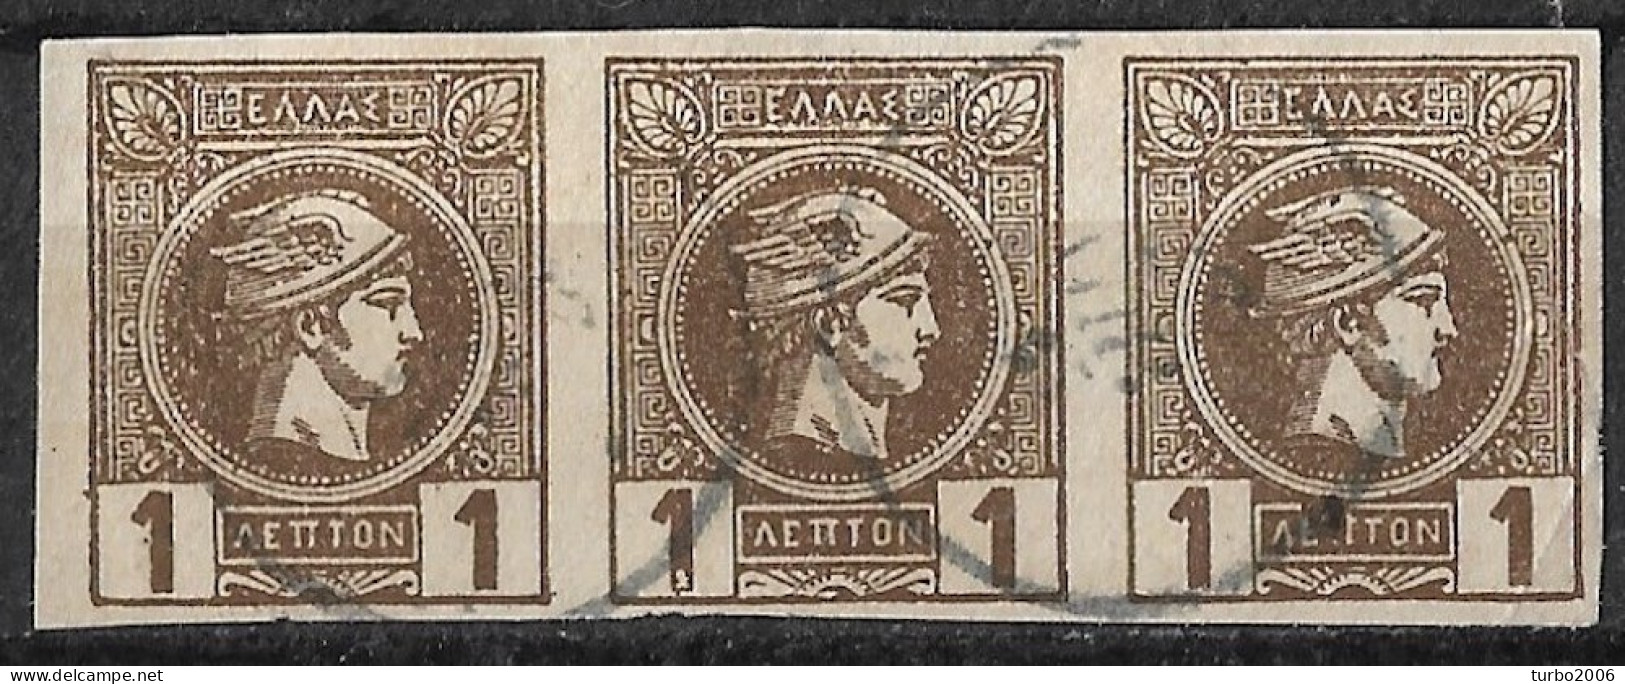 GREECE 1889-1891 Small Hermes Heads Athens Print 1 L Brown Imperforated Strip Of 3 Vl. 88 (white Dot In Middle Stamp) - Gebruikt